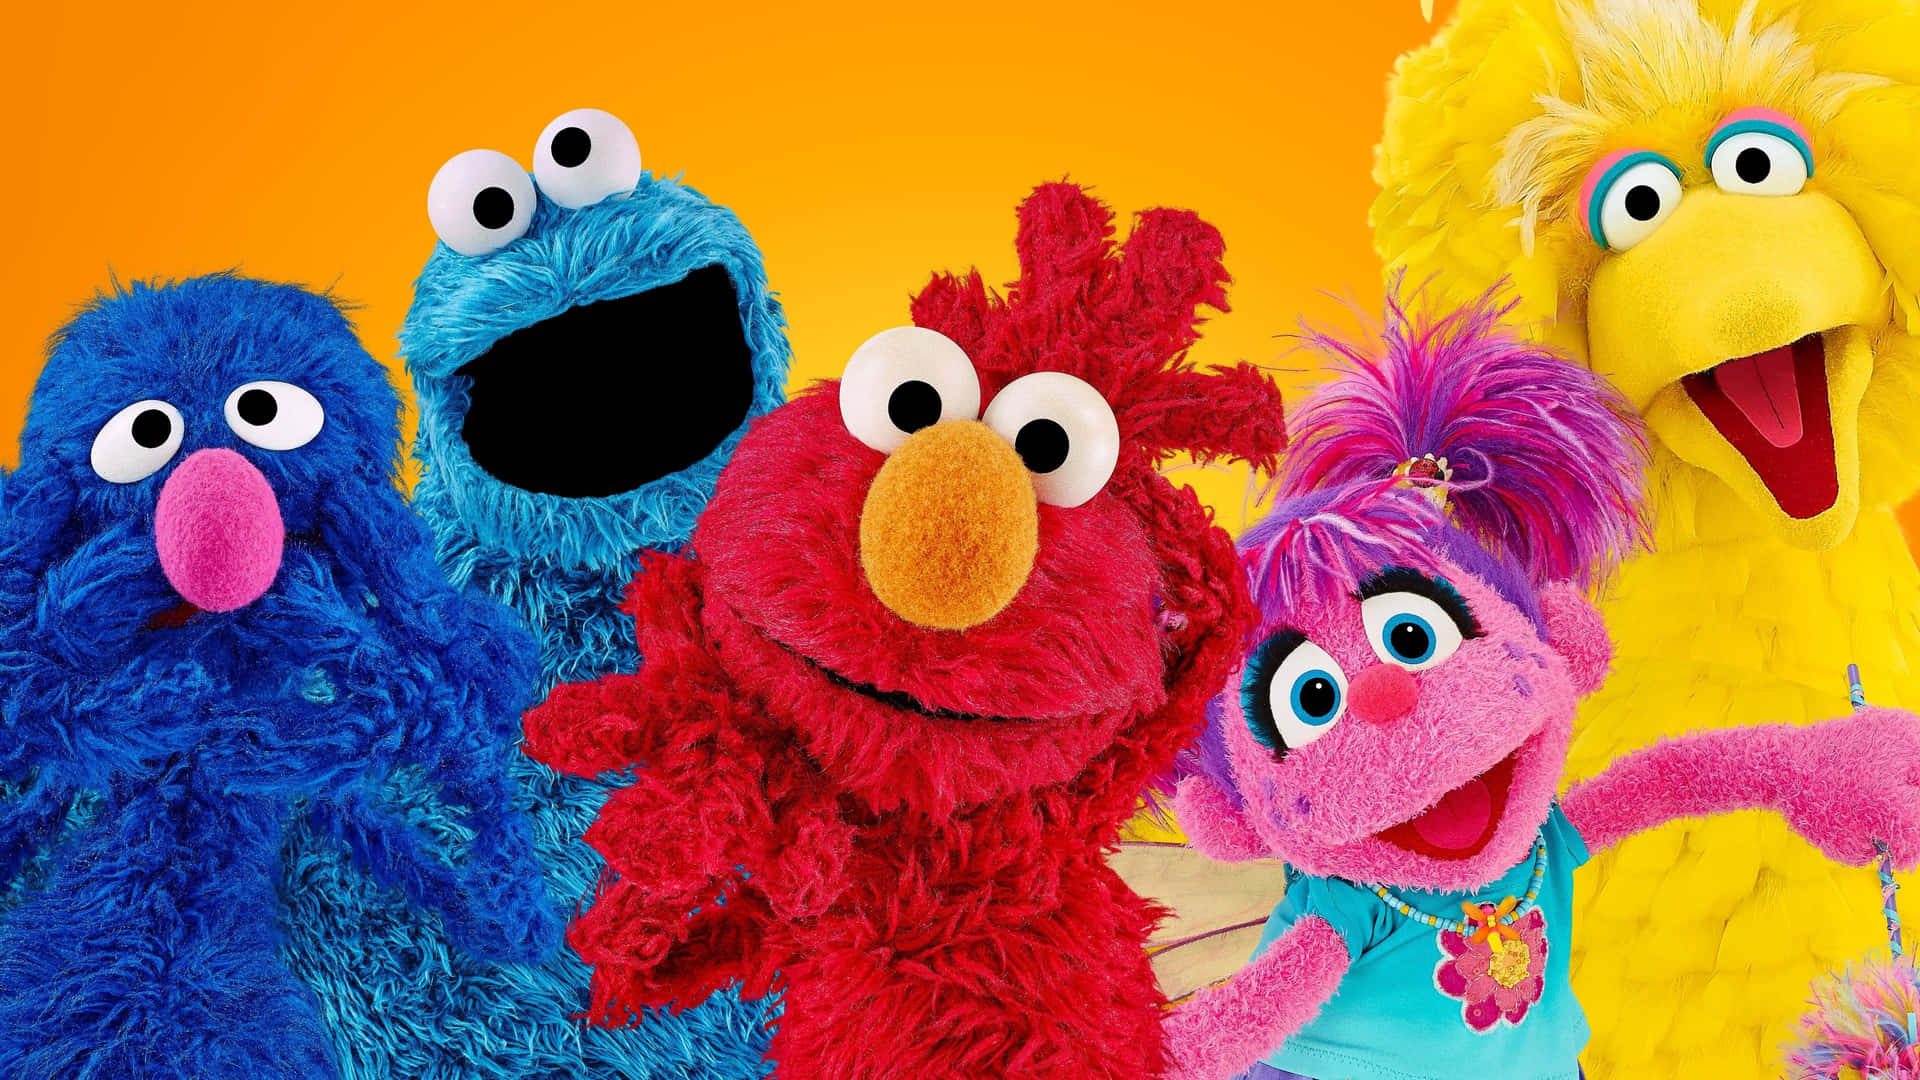 All your favorite Sesame Street characters come together in one spot!